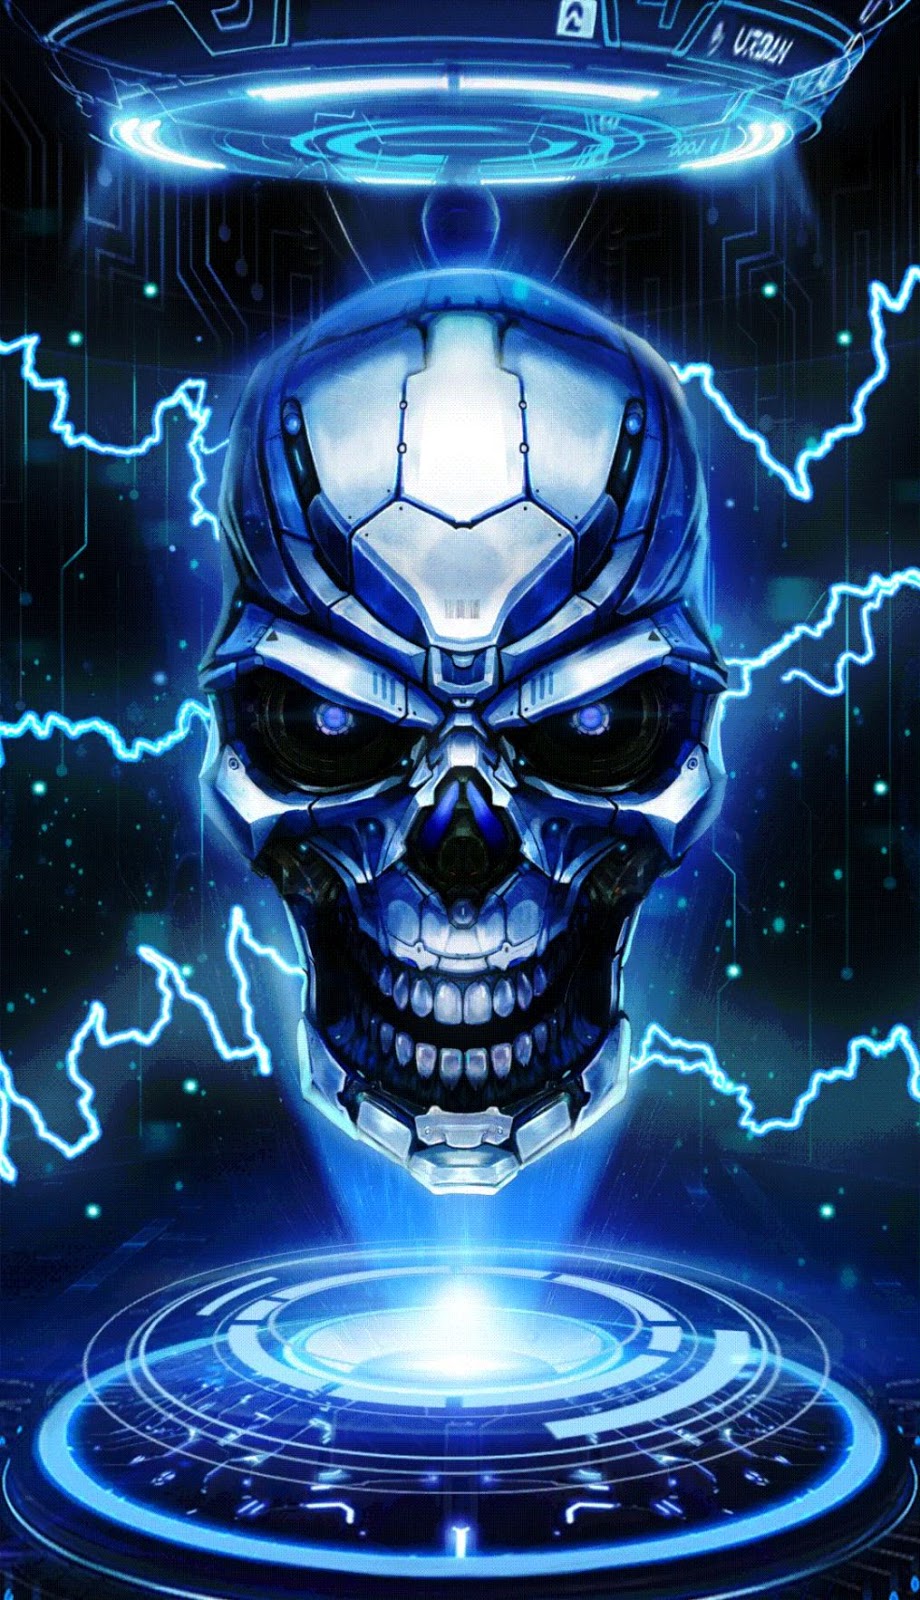 New Cool Skull Live Wallpaper Android ...